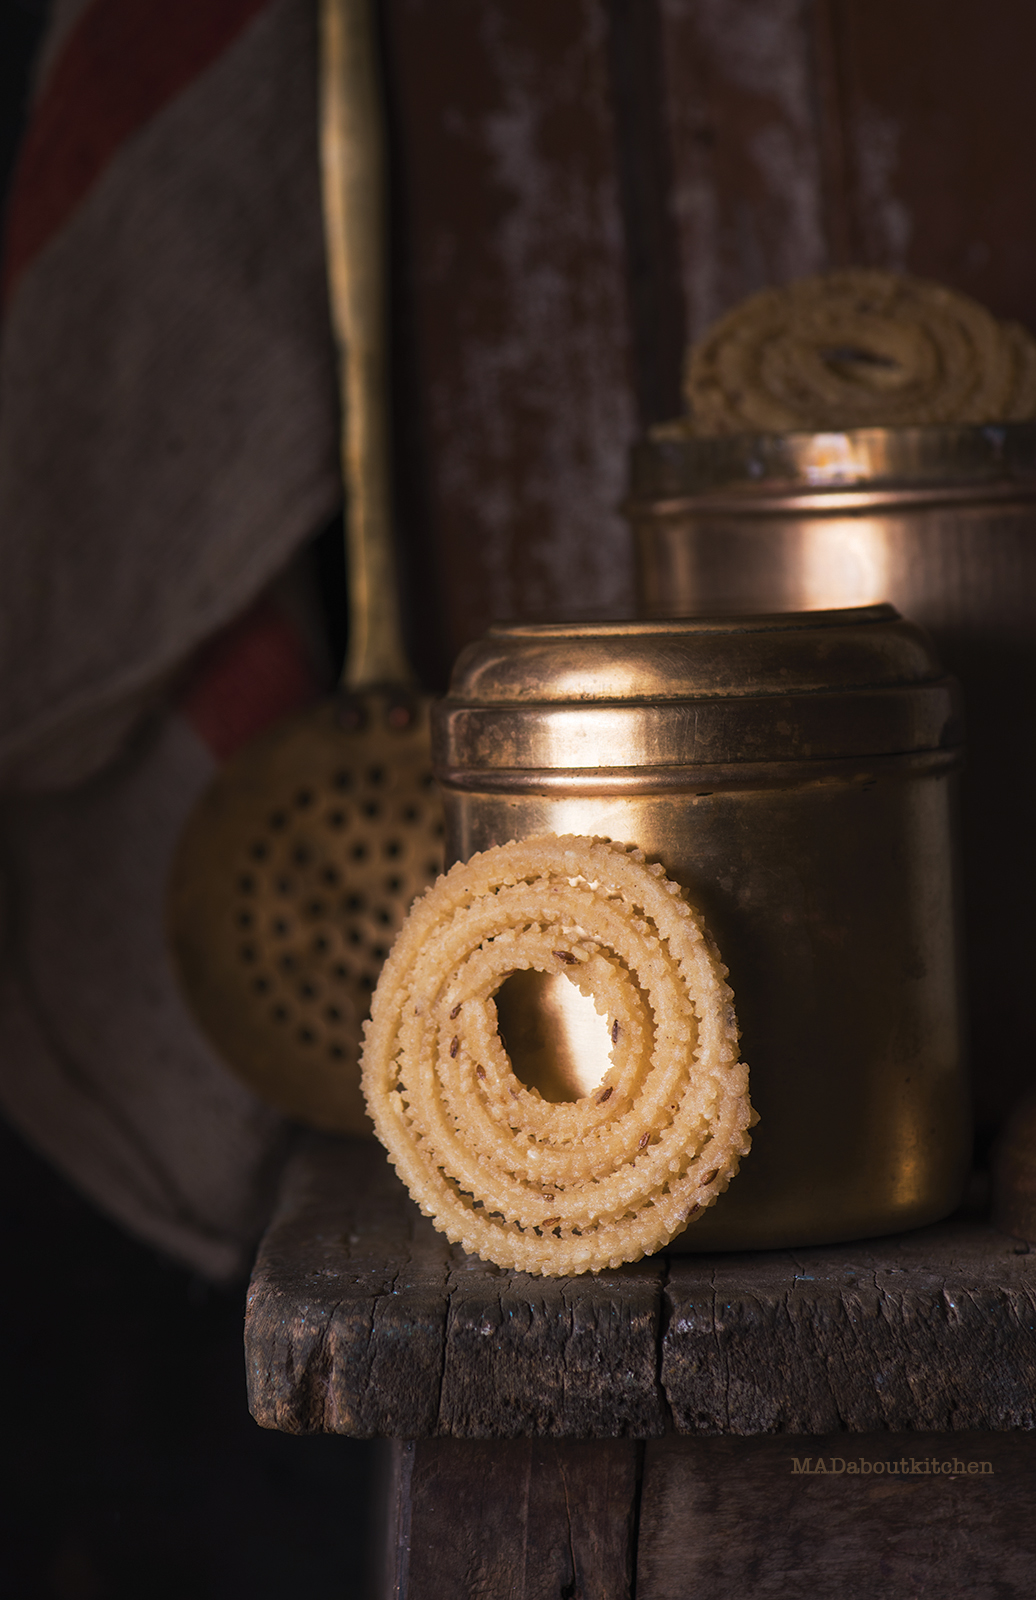  Chakli is a deep fried Indian savoury snack made of rice flour which is crisp and melts in the mouth and is made during Ganesha Chathurthi & other festivals